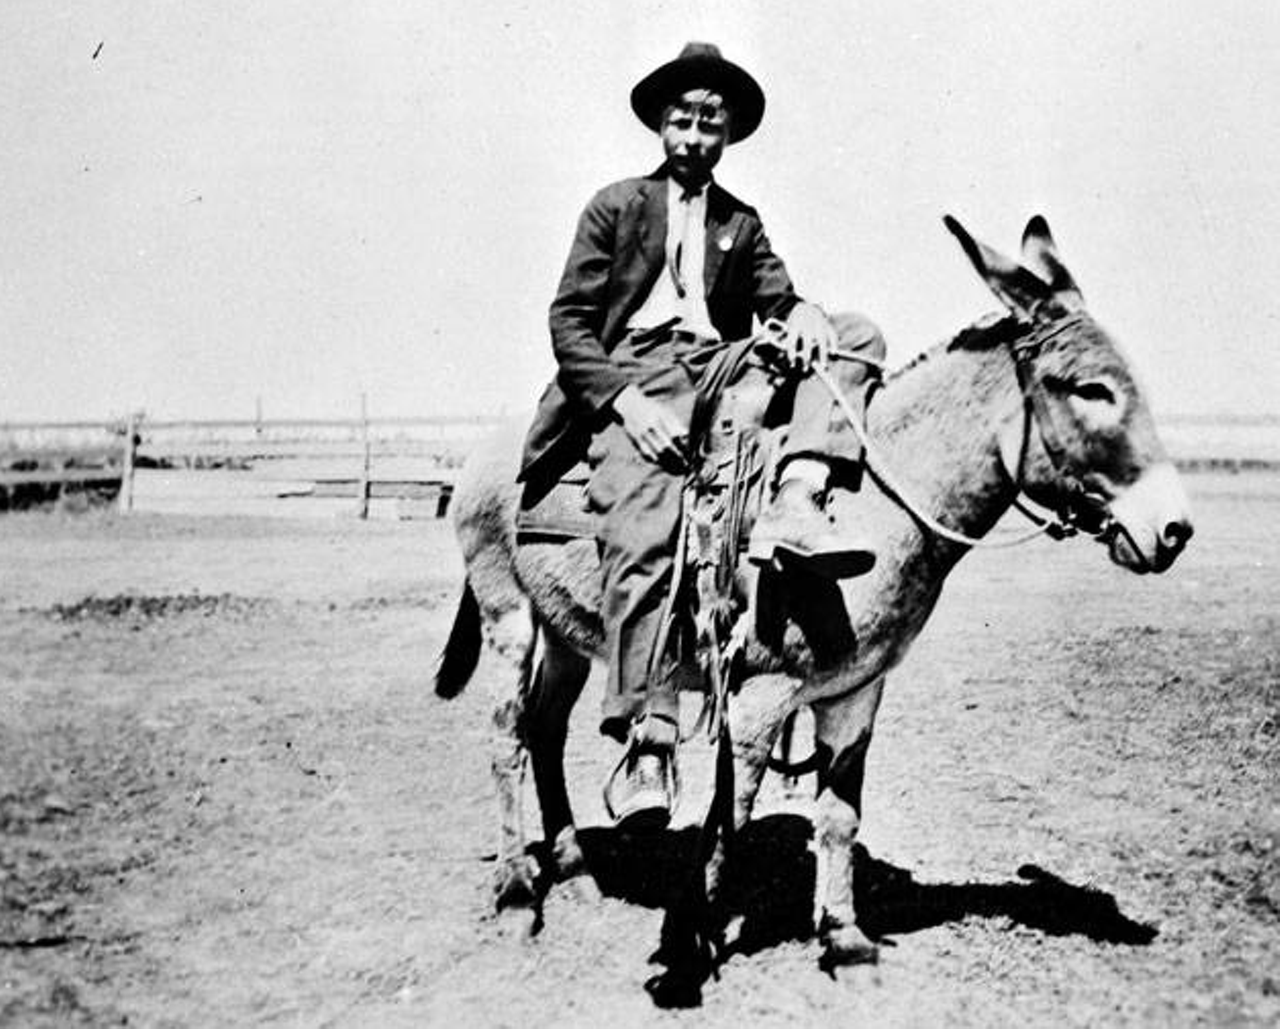 Texas Panhandle farmers had it really rough in the 1930s.
After dealing with the Great Depression, farmers in the state’s Panhandle had to endure the Dust Bowl — extreme drought conditions that lasted from 1934 to 1939. It was so bad that lots of farmers had to give up on the practice, a source of stable income, completely.
Photo via UTSA Libraries Special Collections